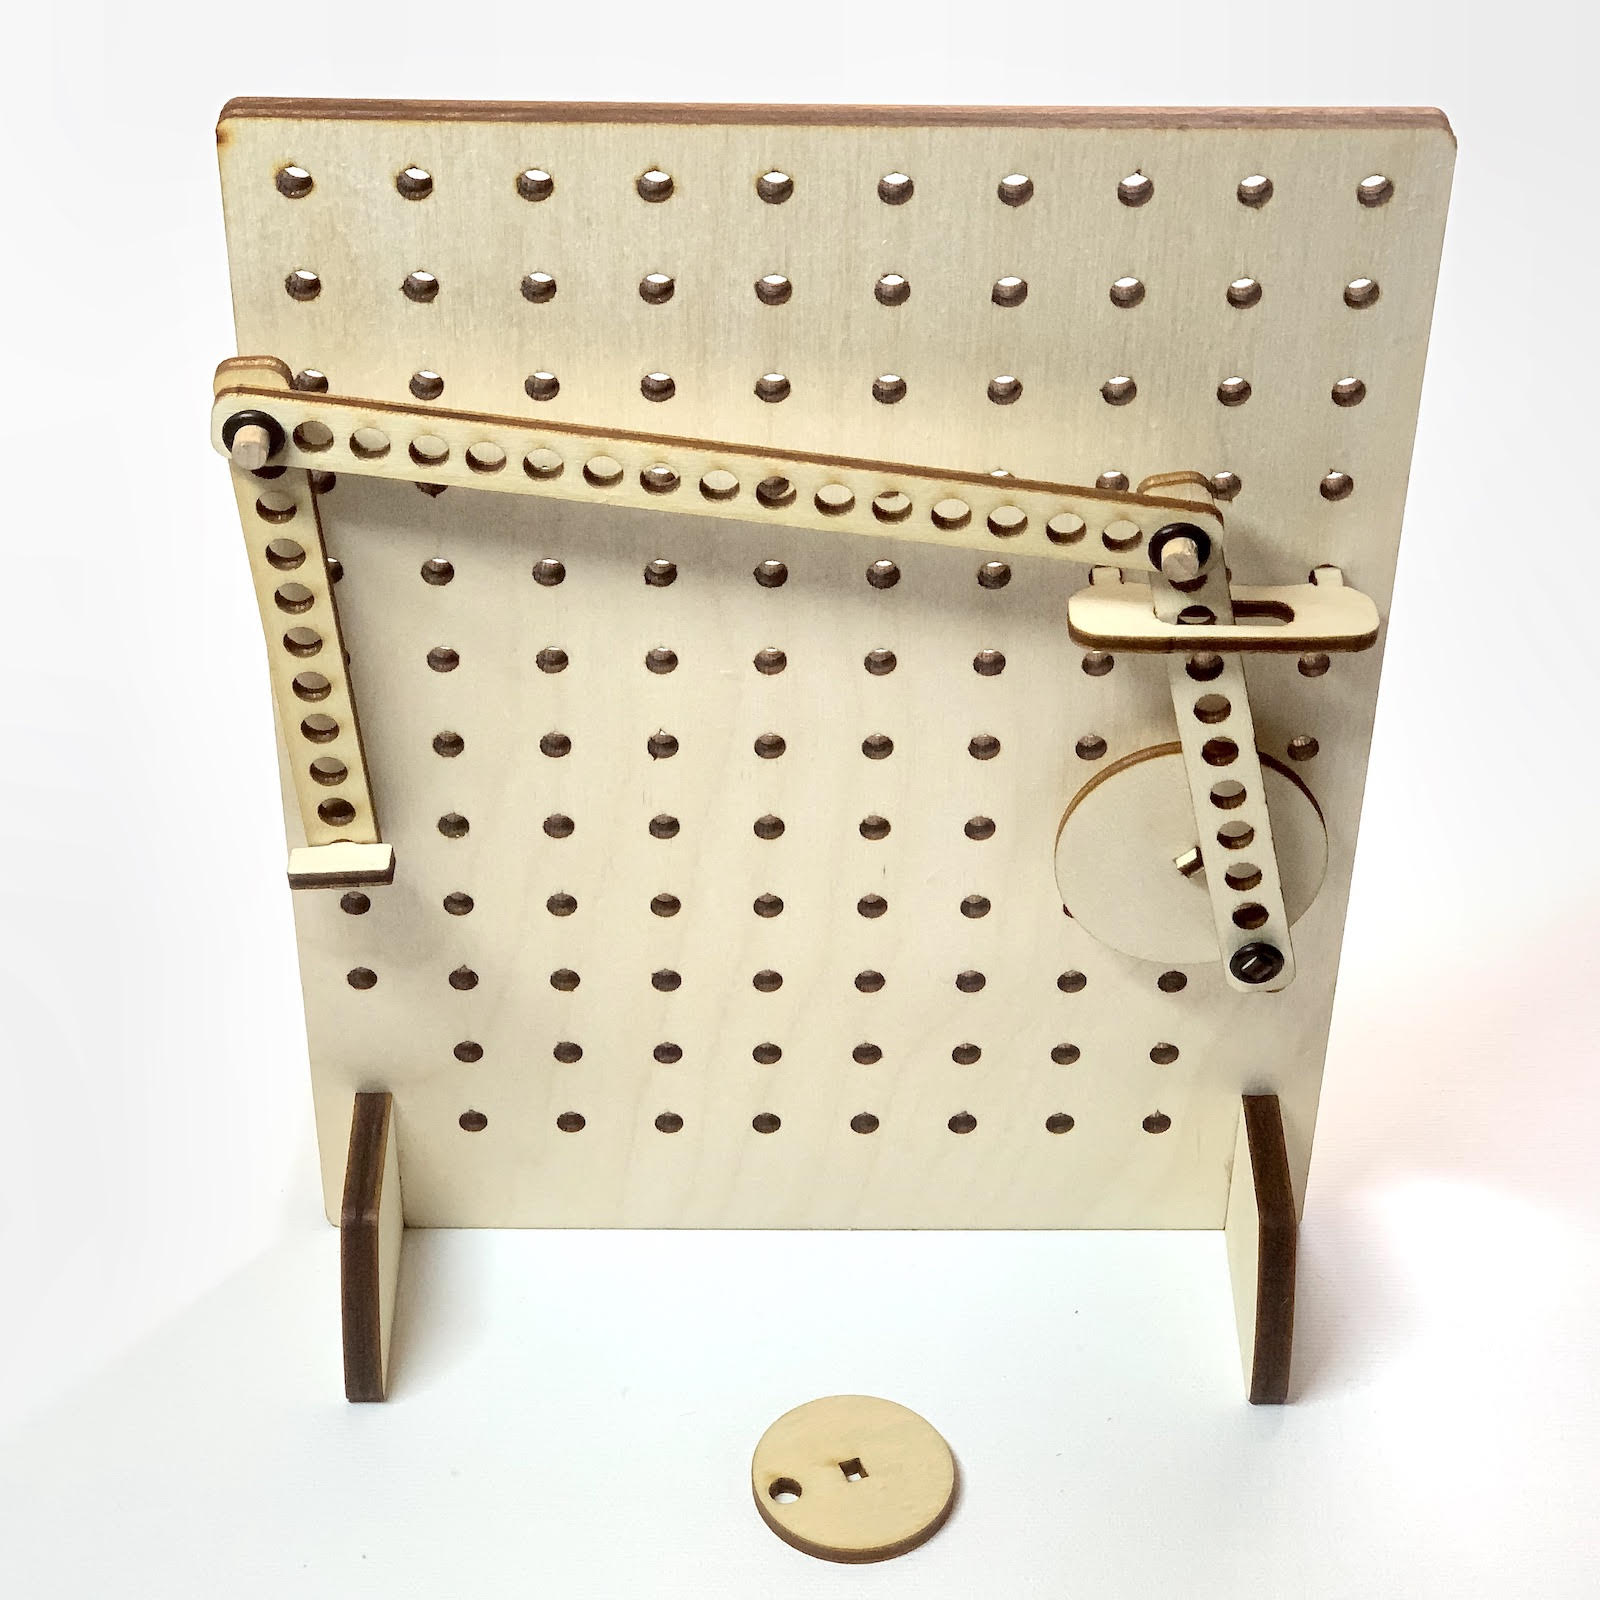 wooden pegboard with mechanical linkages